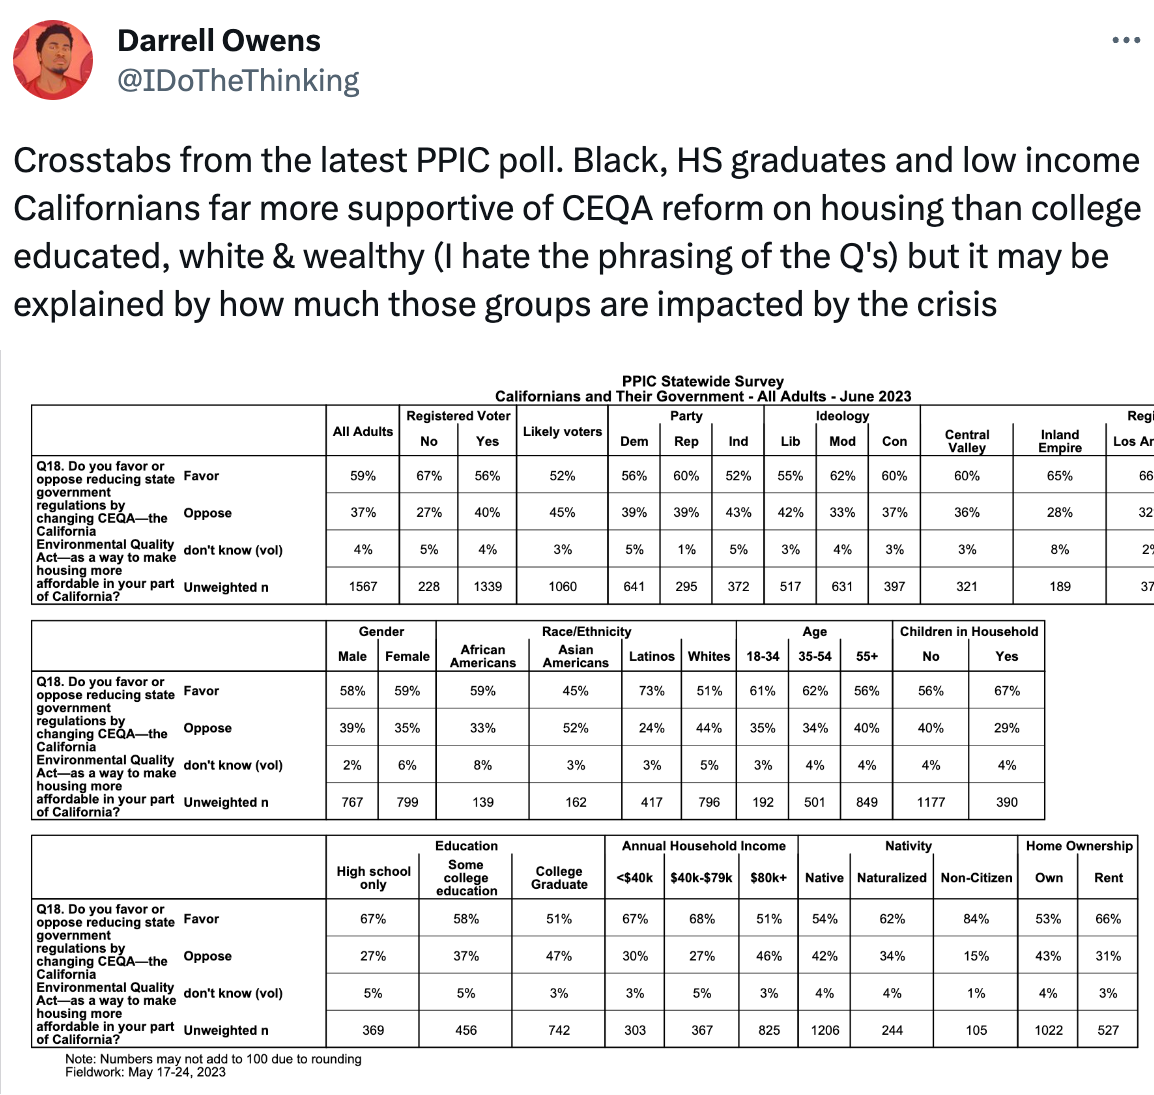  Darrell Owens @IDoTheThinking Crosstabs from the latest PPIC poll. Black, HS graduates and low income Californians far more supportive of CEQA reform on housing than college educated, white & wealthy (I hate the phrasing of the Q's) but it may be explained by how much those groups are impacted by the crisis